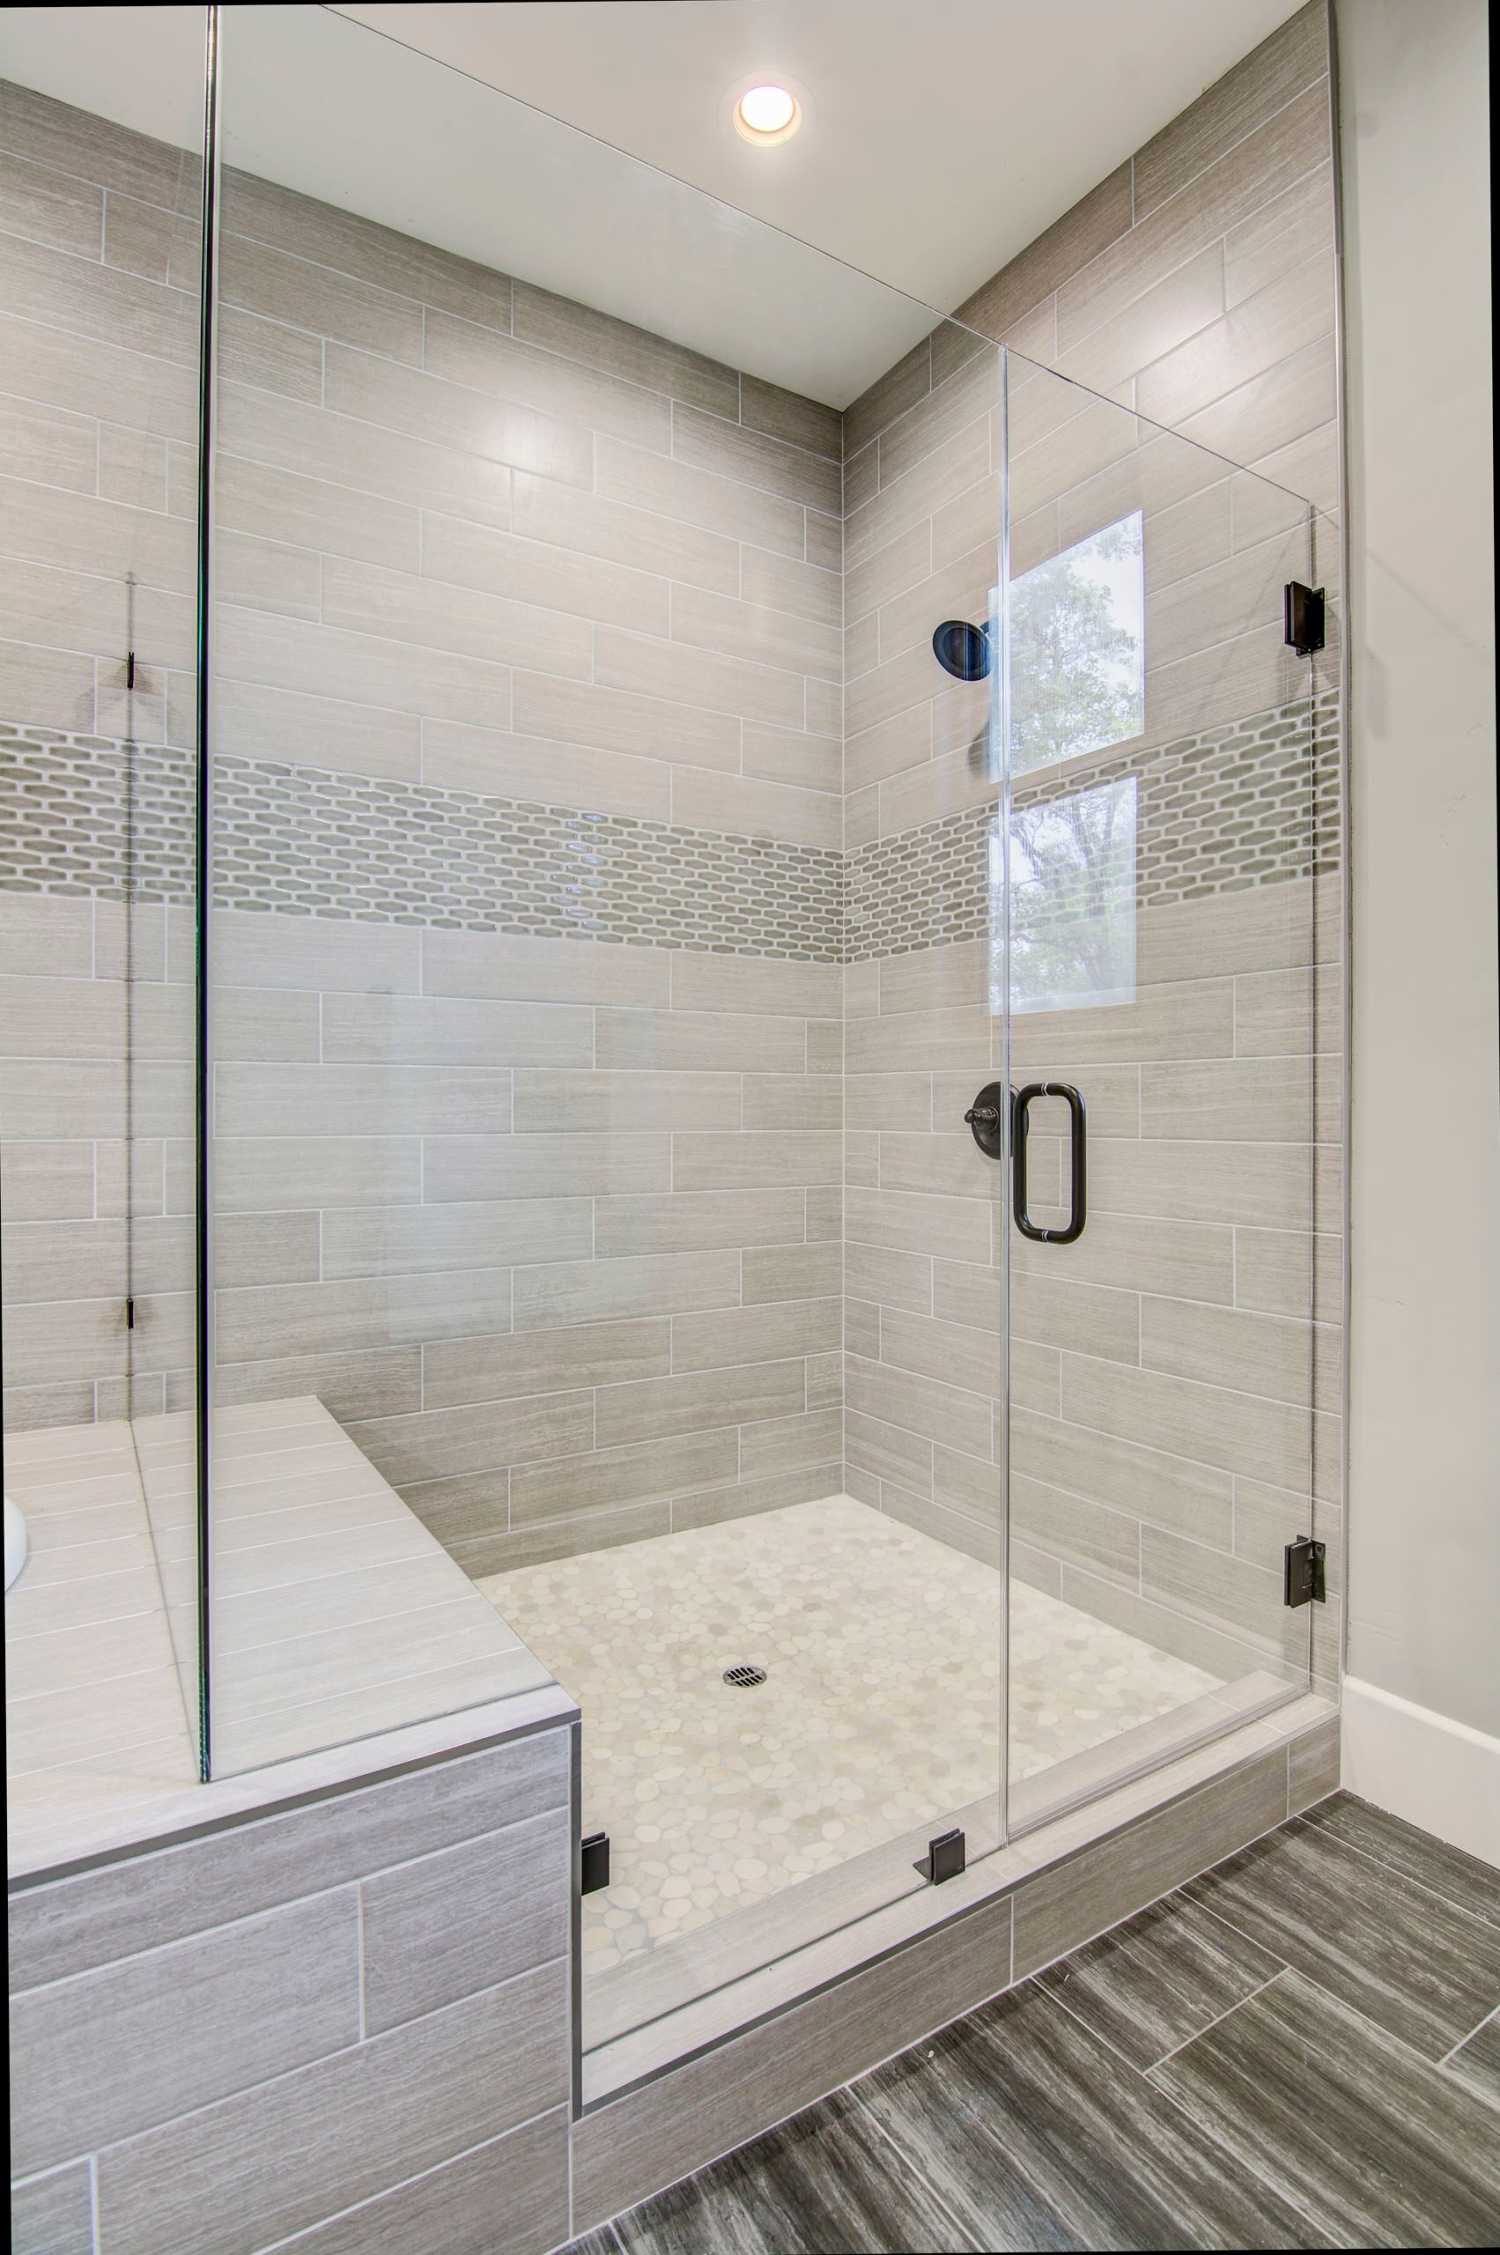 4 Easy and Clever Bathroom Upgrade Ideas Without a Renovation